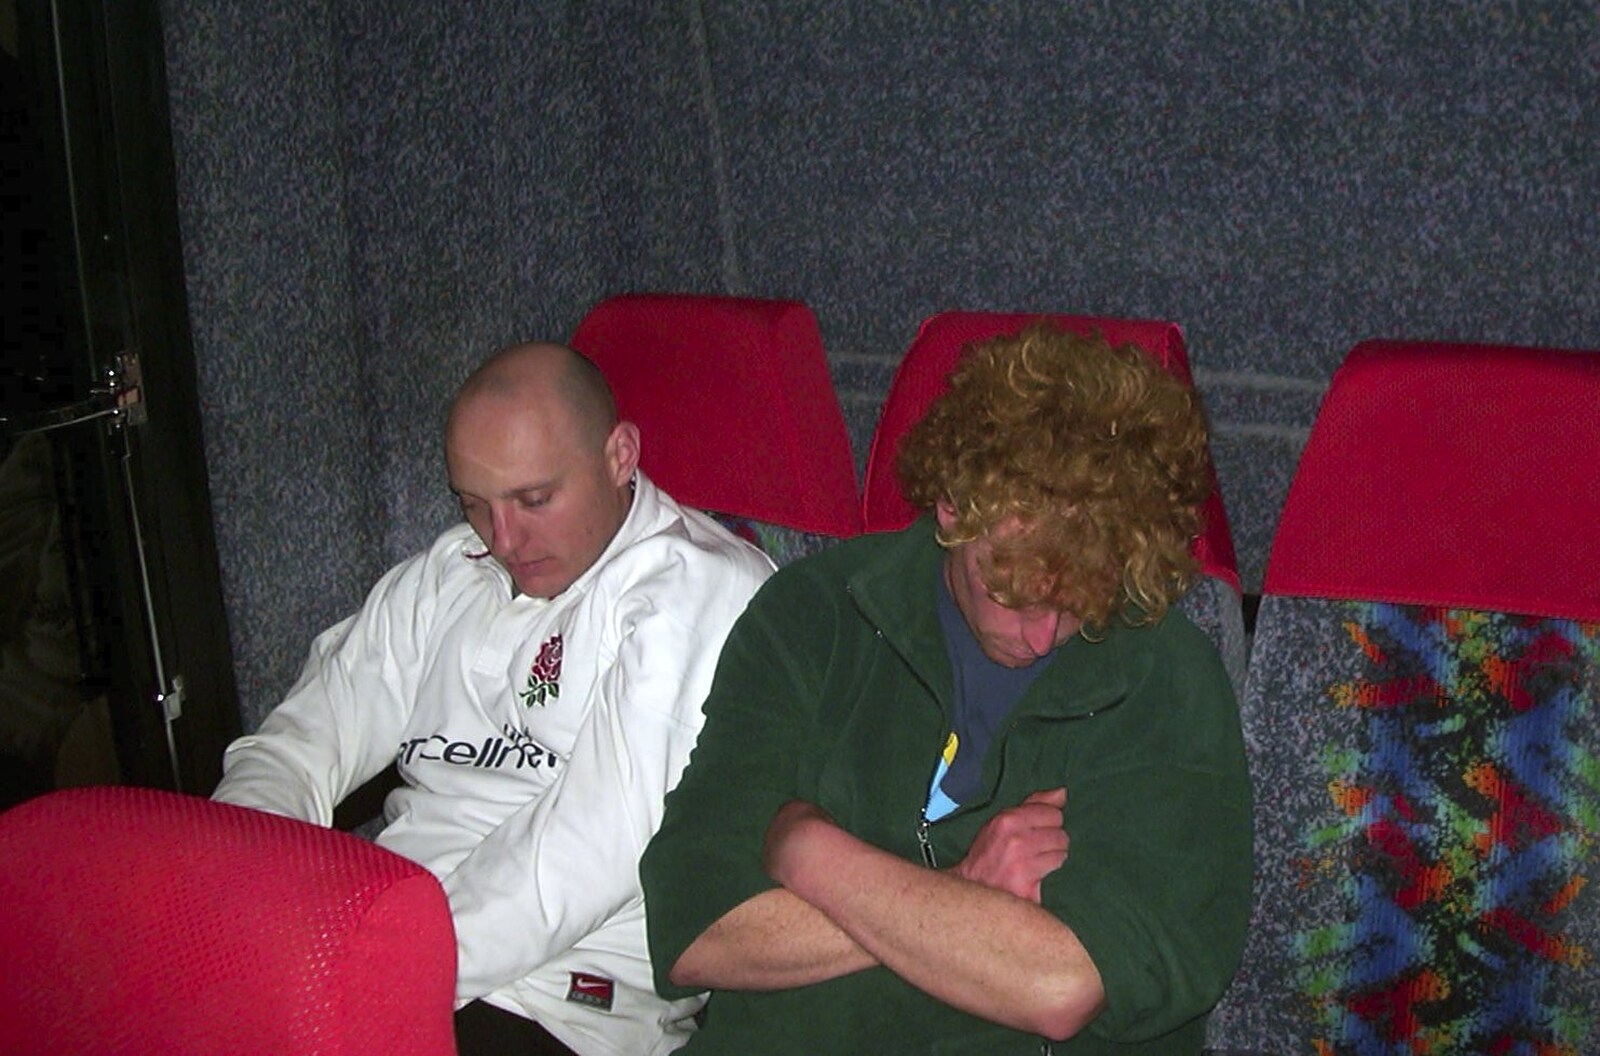 Sleeping at the back of the bus from The Brome Swan at the Norwich Beer Festival, St. Andrew's Hall, Norwich - 29th October 2003